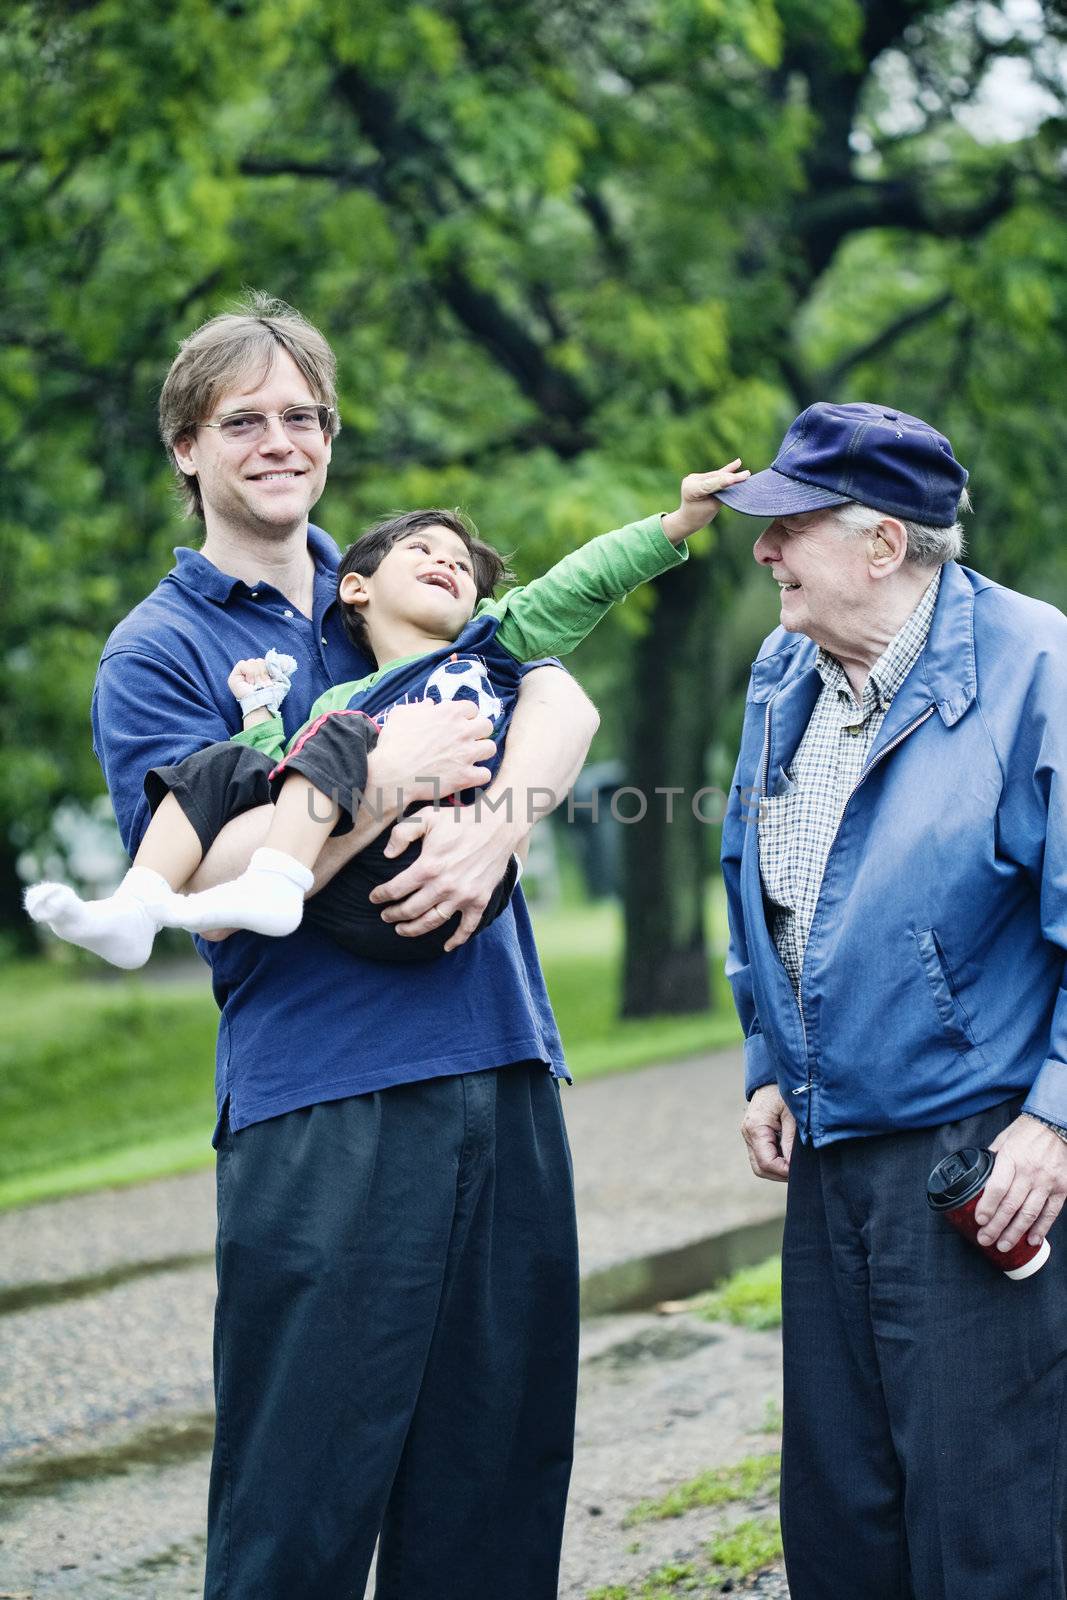 Three generations interacting together